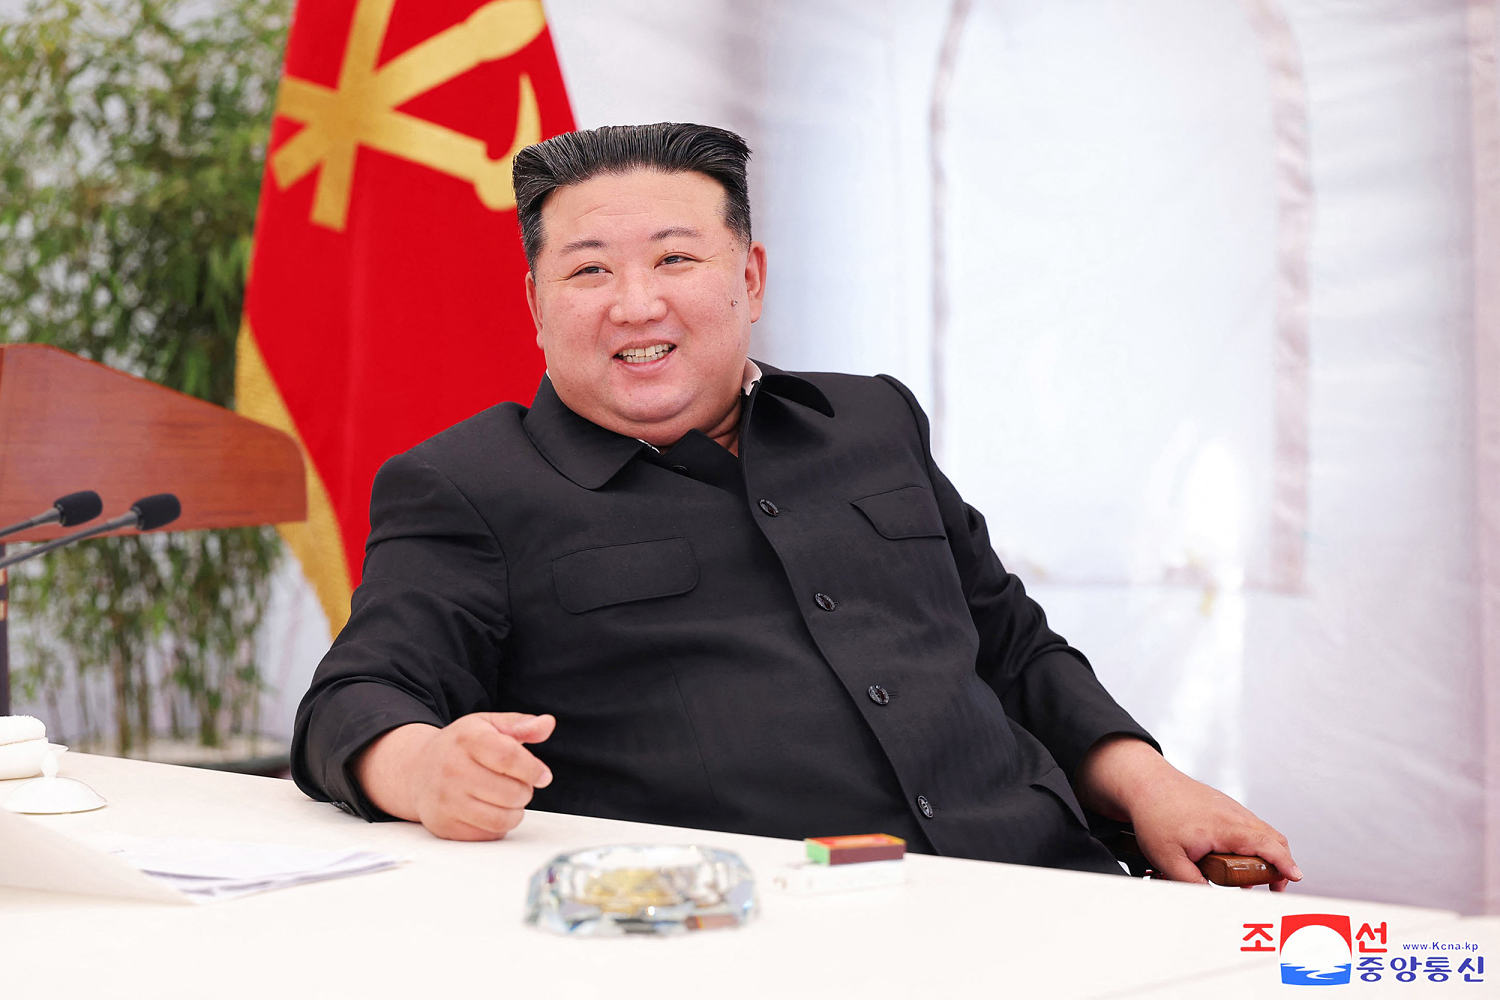 North Korean officials seek medicine for Kim’s health problems related to obesity, Seoul says